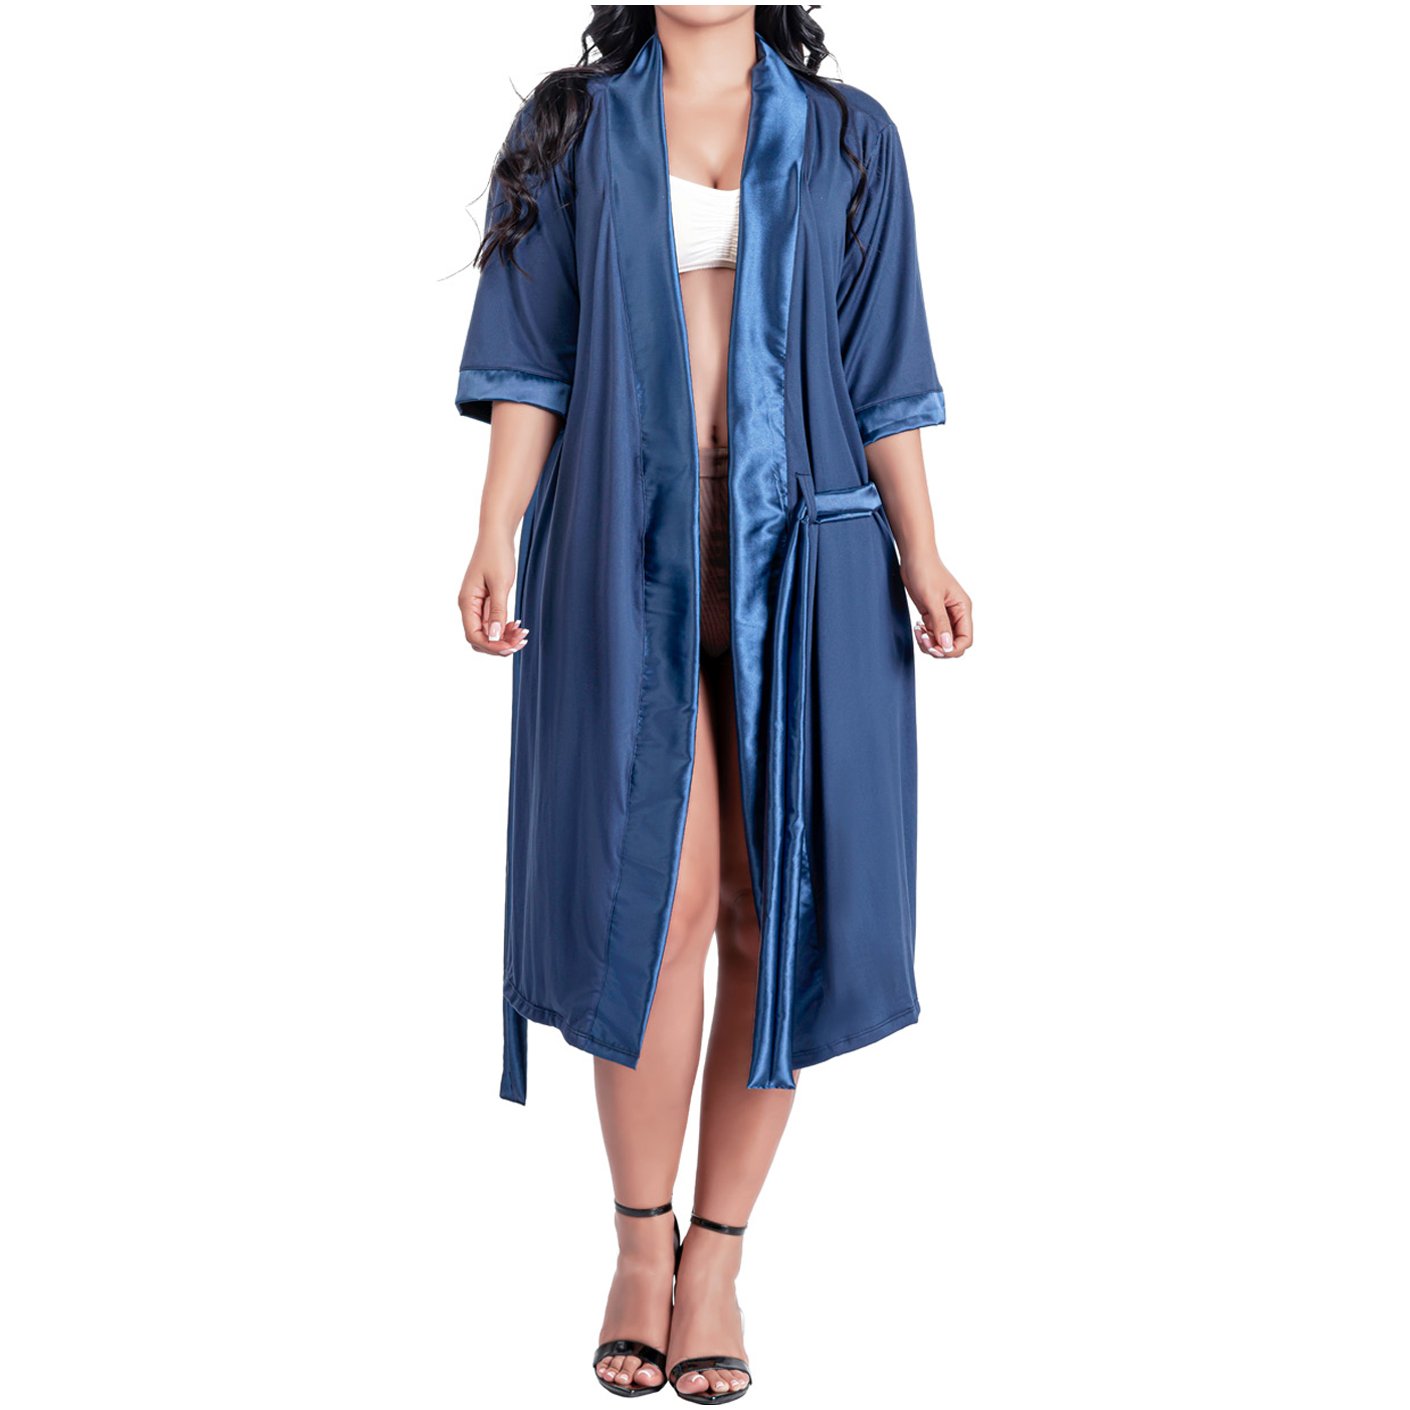 Top-Quality Robes for a Safe and Stylish Recovery